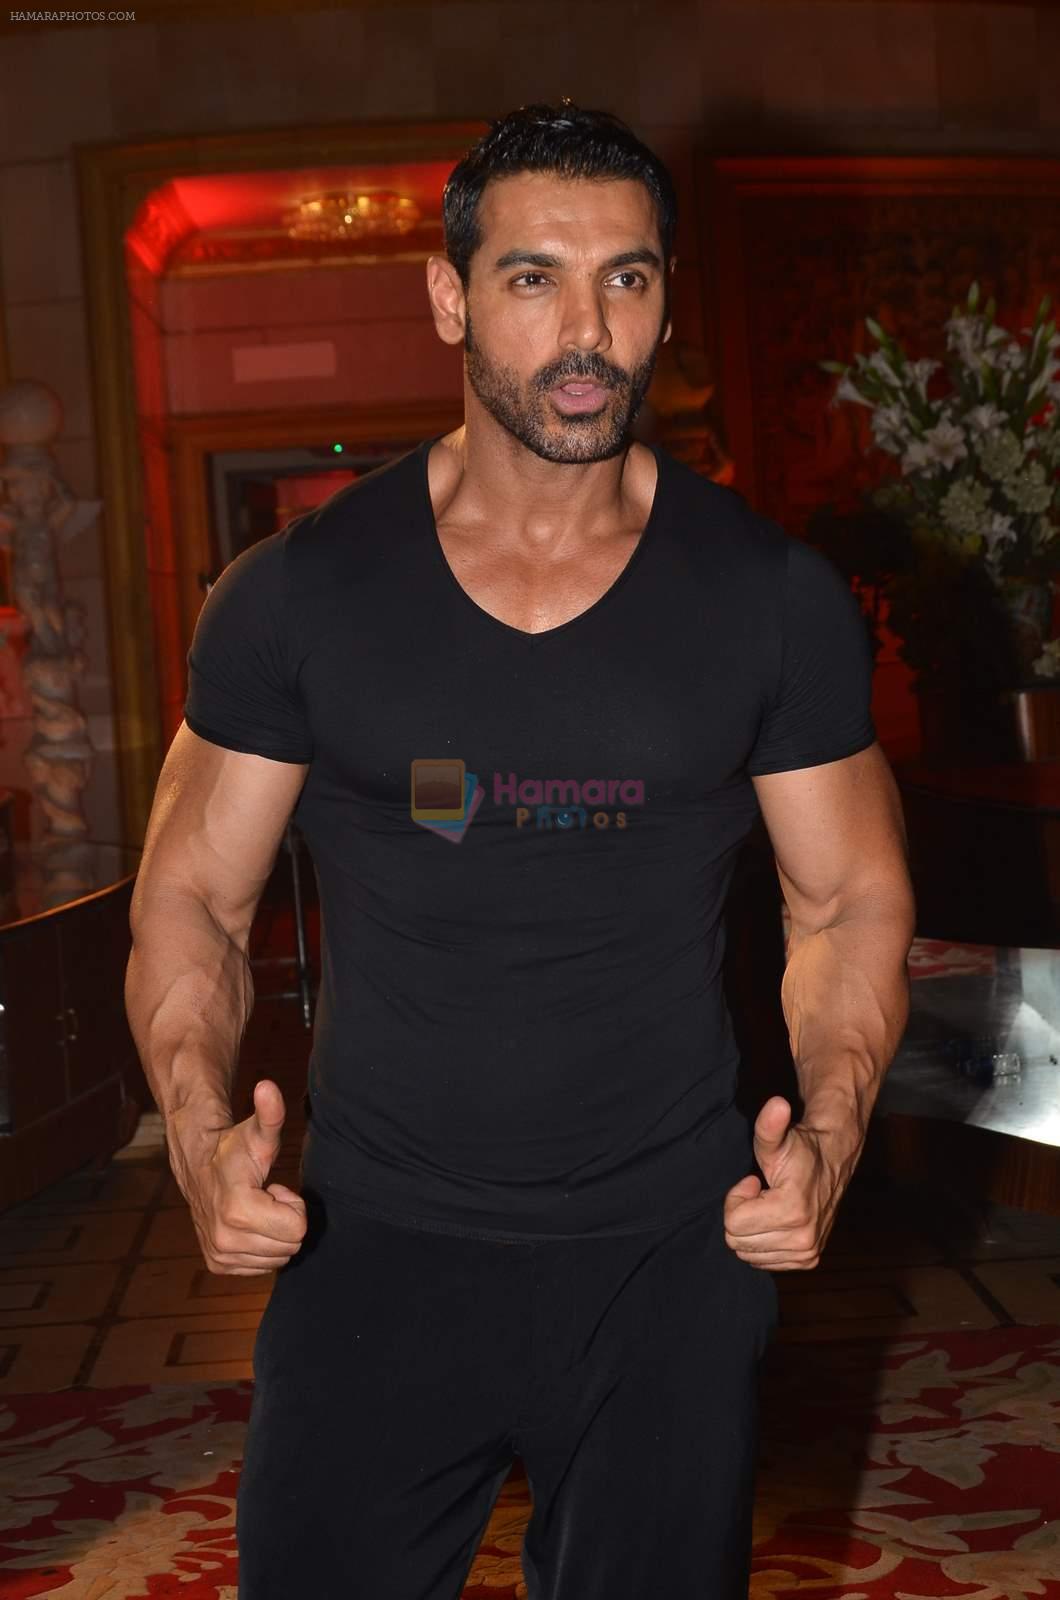 John Abraham at Welcome Back song shoot in Aarey Milk Colony on 13th July 2015